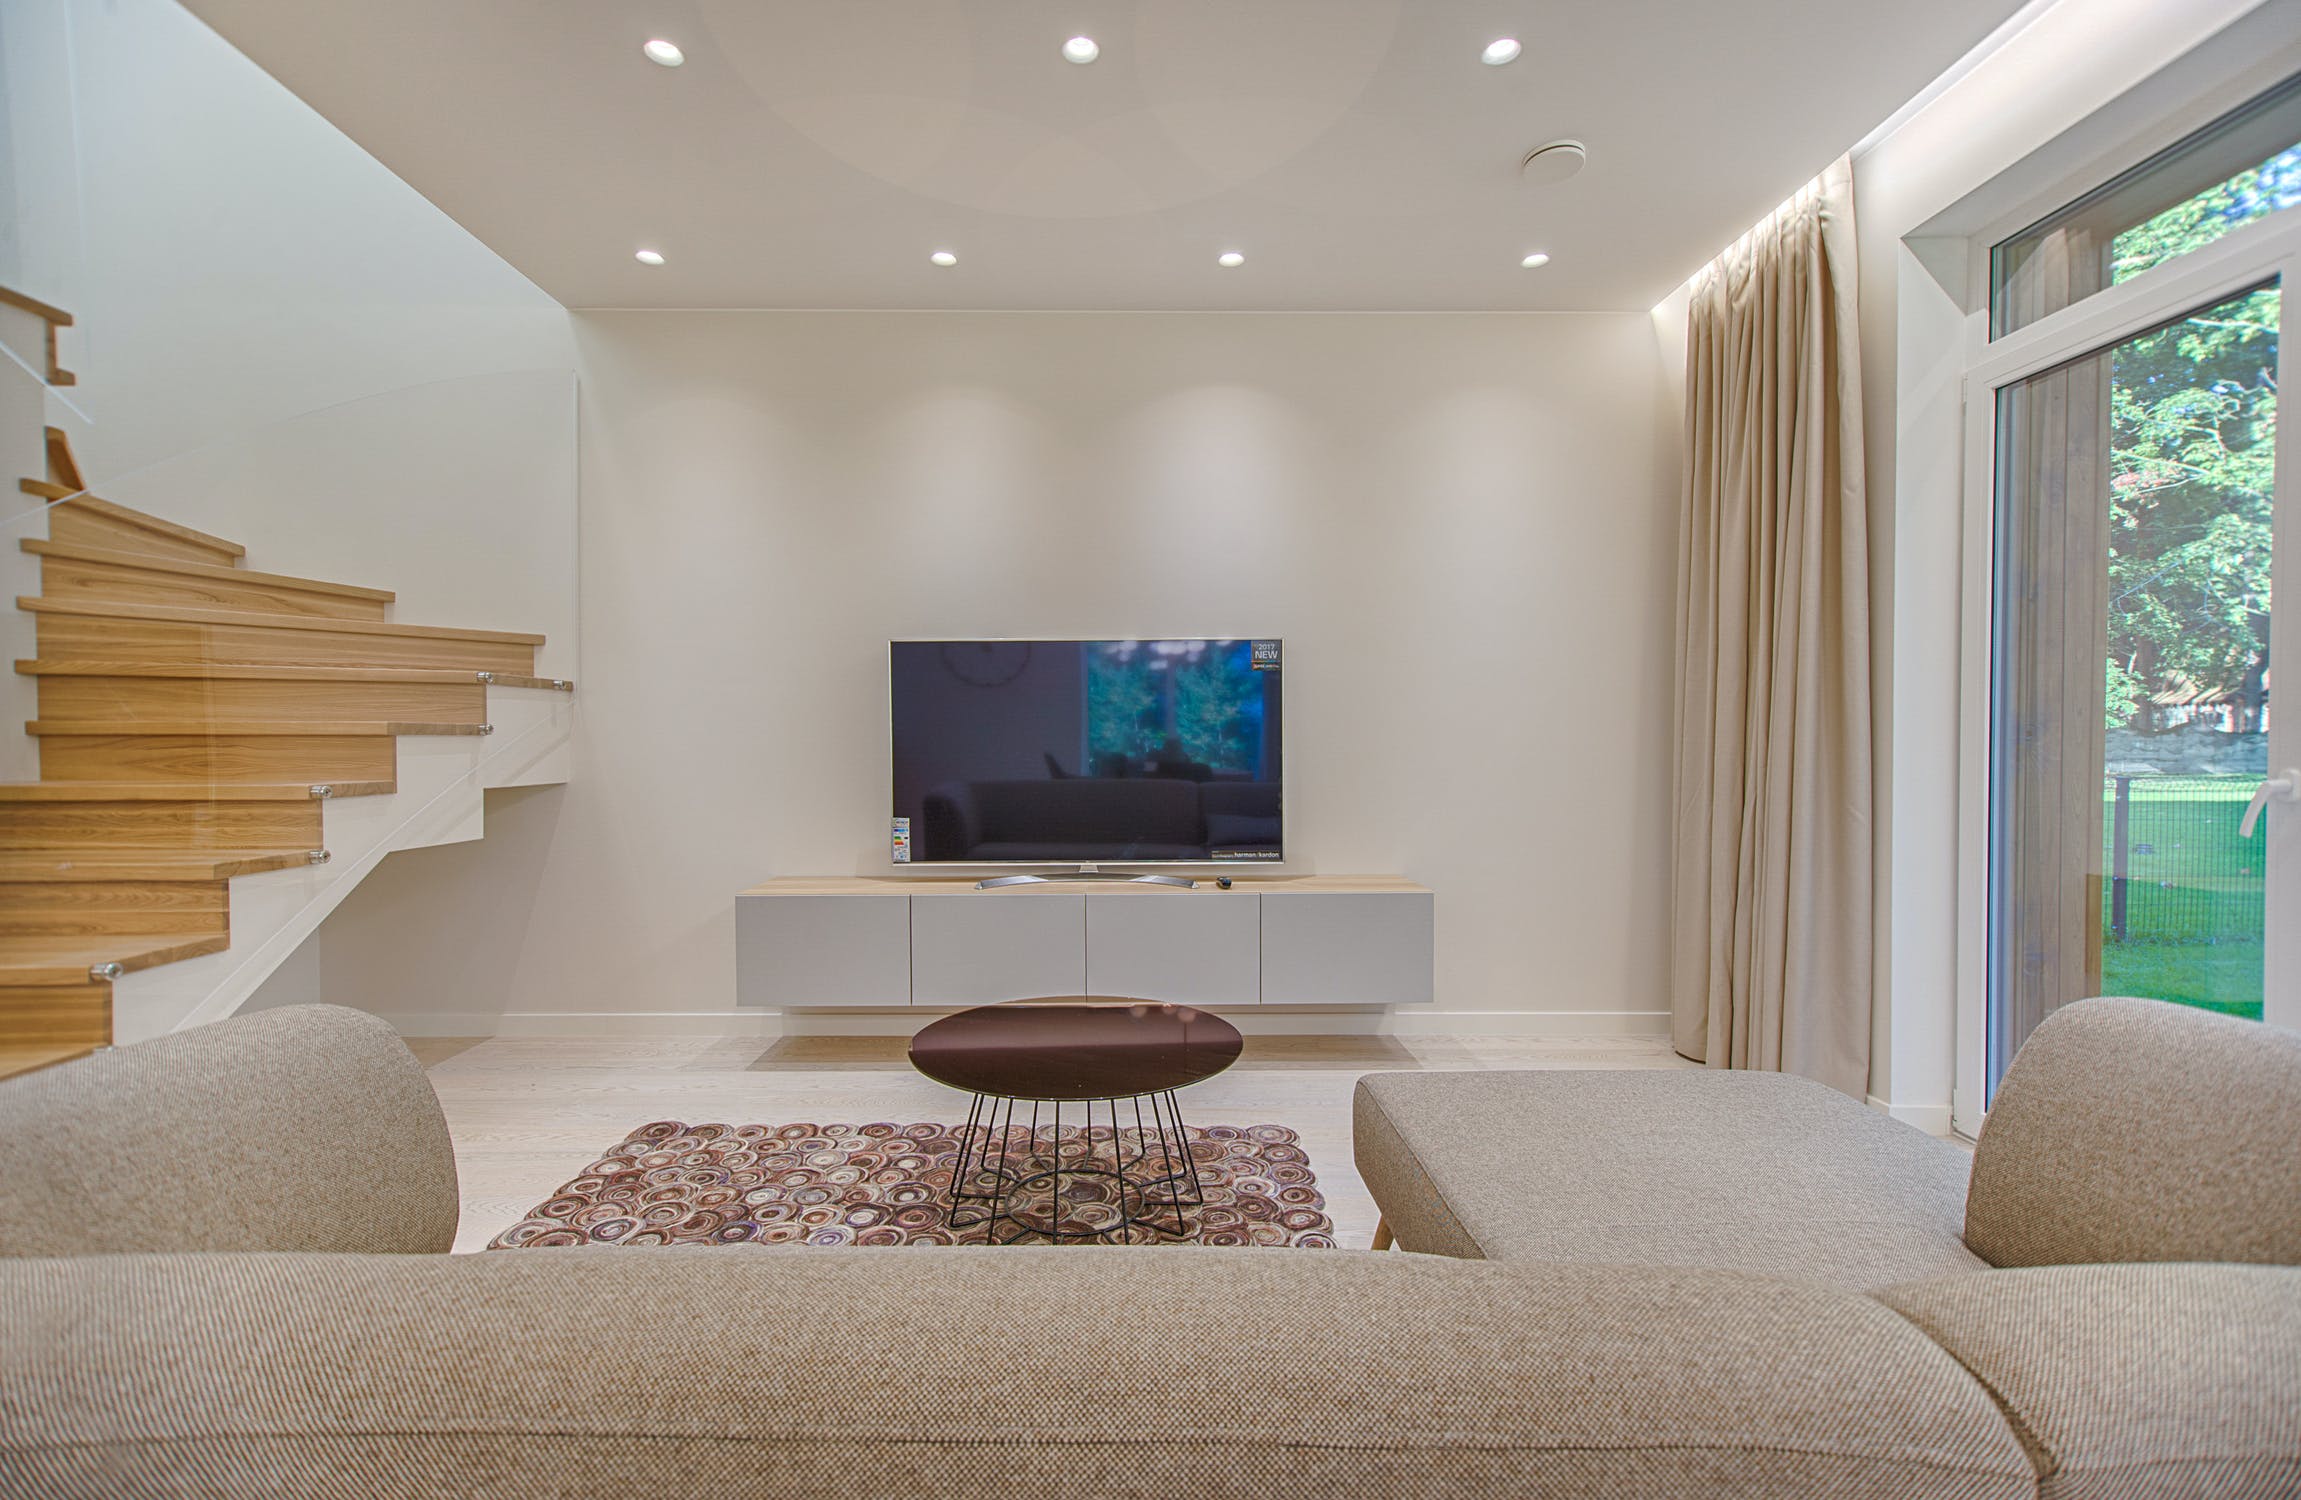 3 Ways to Refresh The Look of Your TV Unit